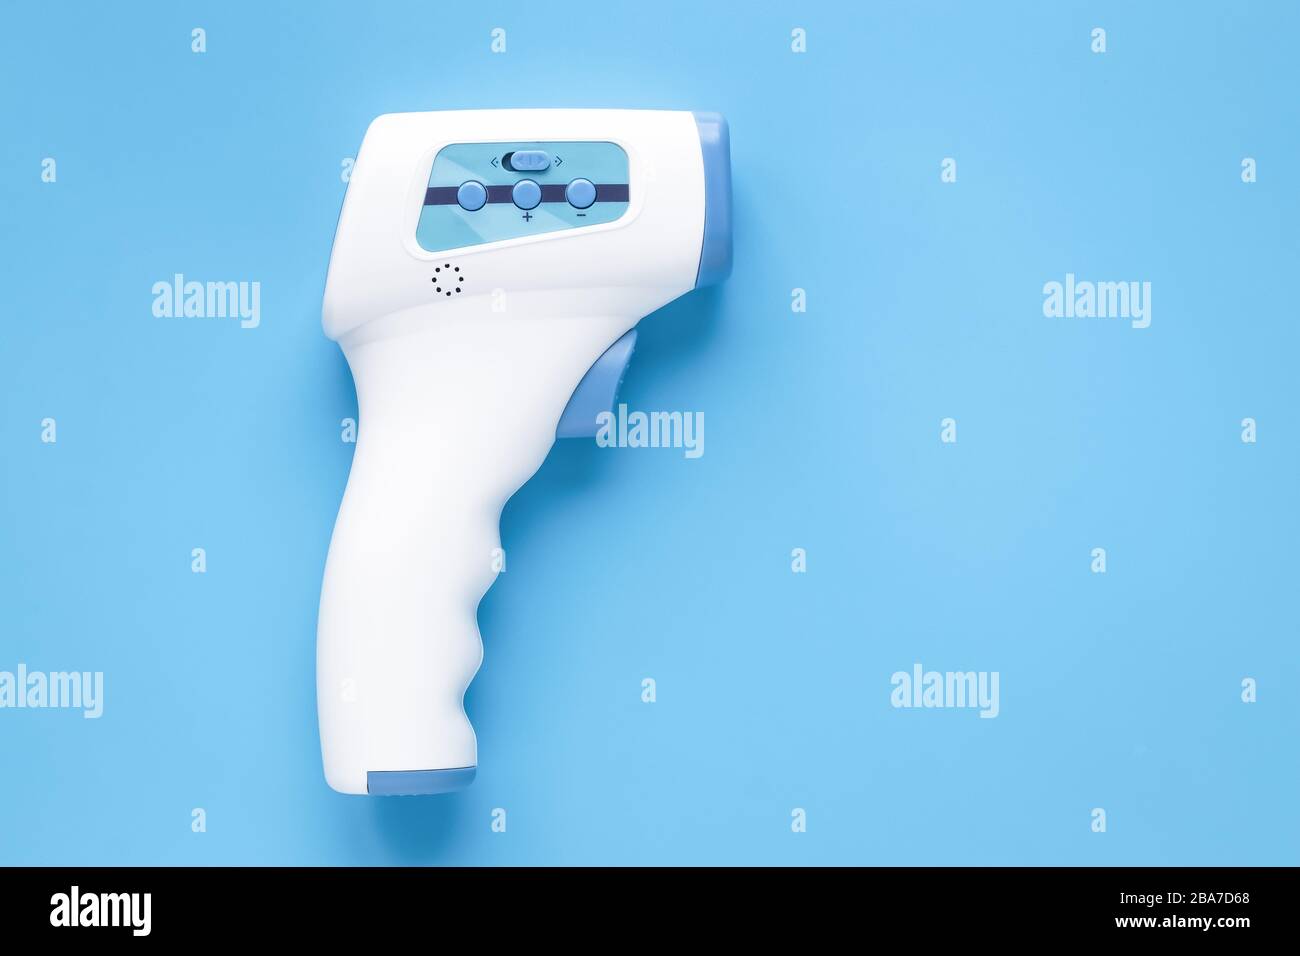 https://c8.alamy.com/comp/2BA7D68/thermal-radiation-thermometers-infrared-thermometer-temperature-gun-to-measure-temperature-from-a-distance-without-contact-with-the-object-to-be-me-2BA7D68.jpg